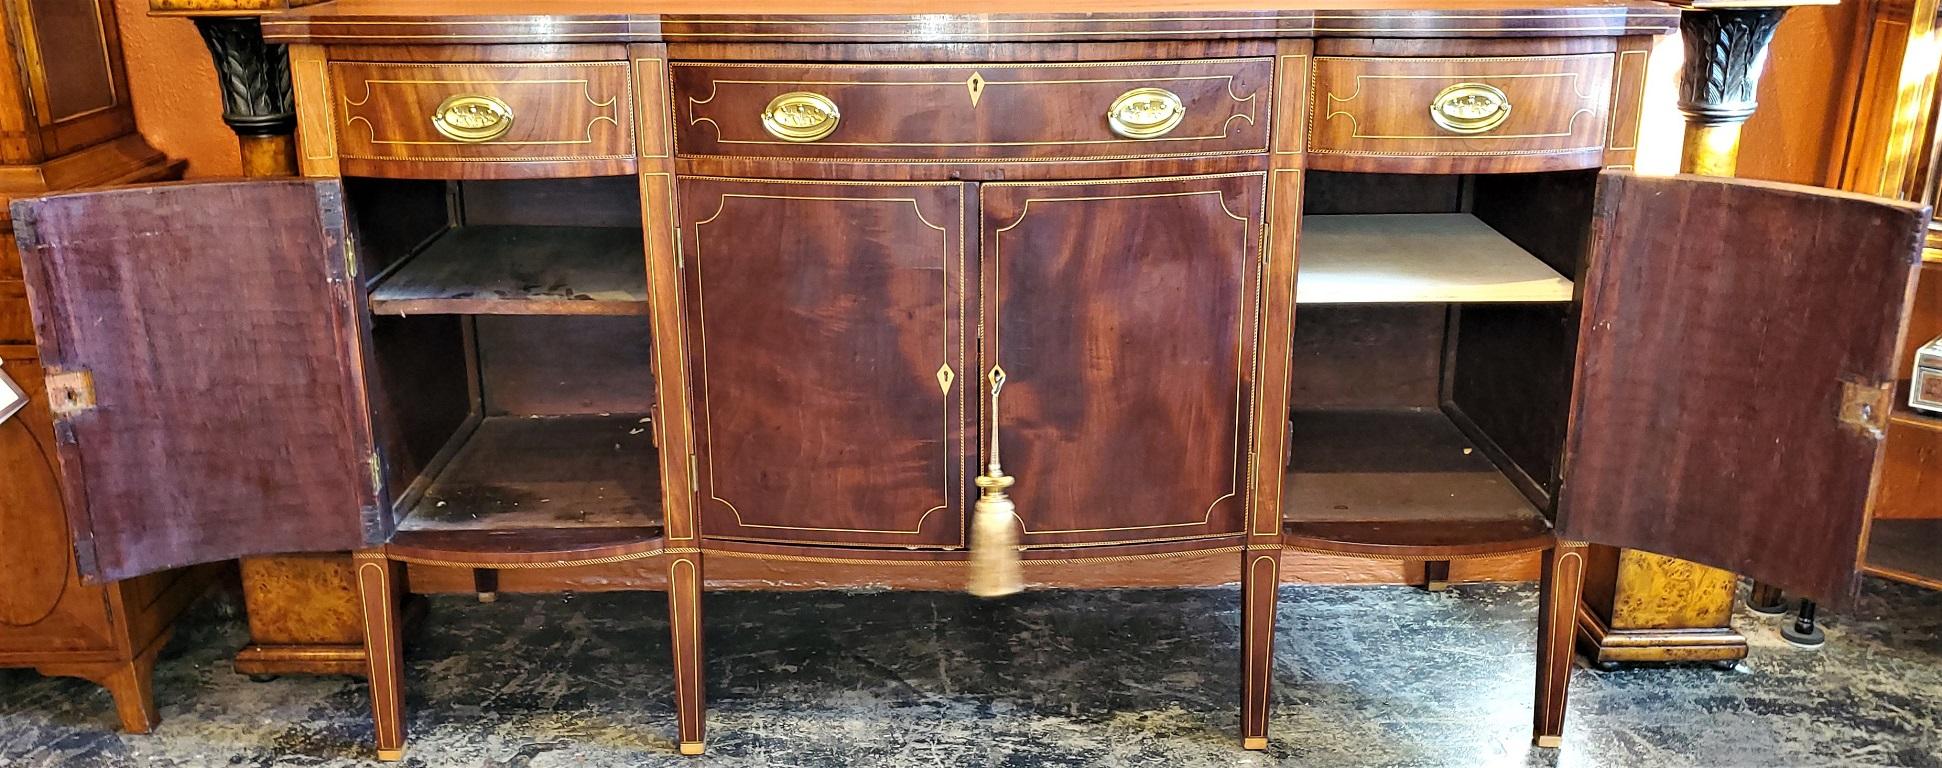 Early 19th Century American Sheraton Sideboard Attributable to Duncan Phyfe In Good Condition For Sale In Dallas, TX